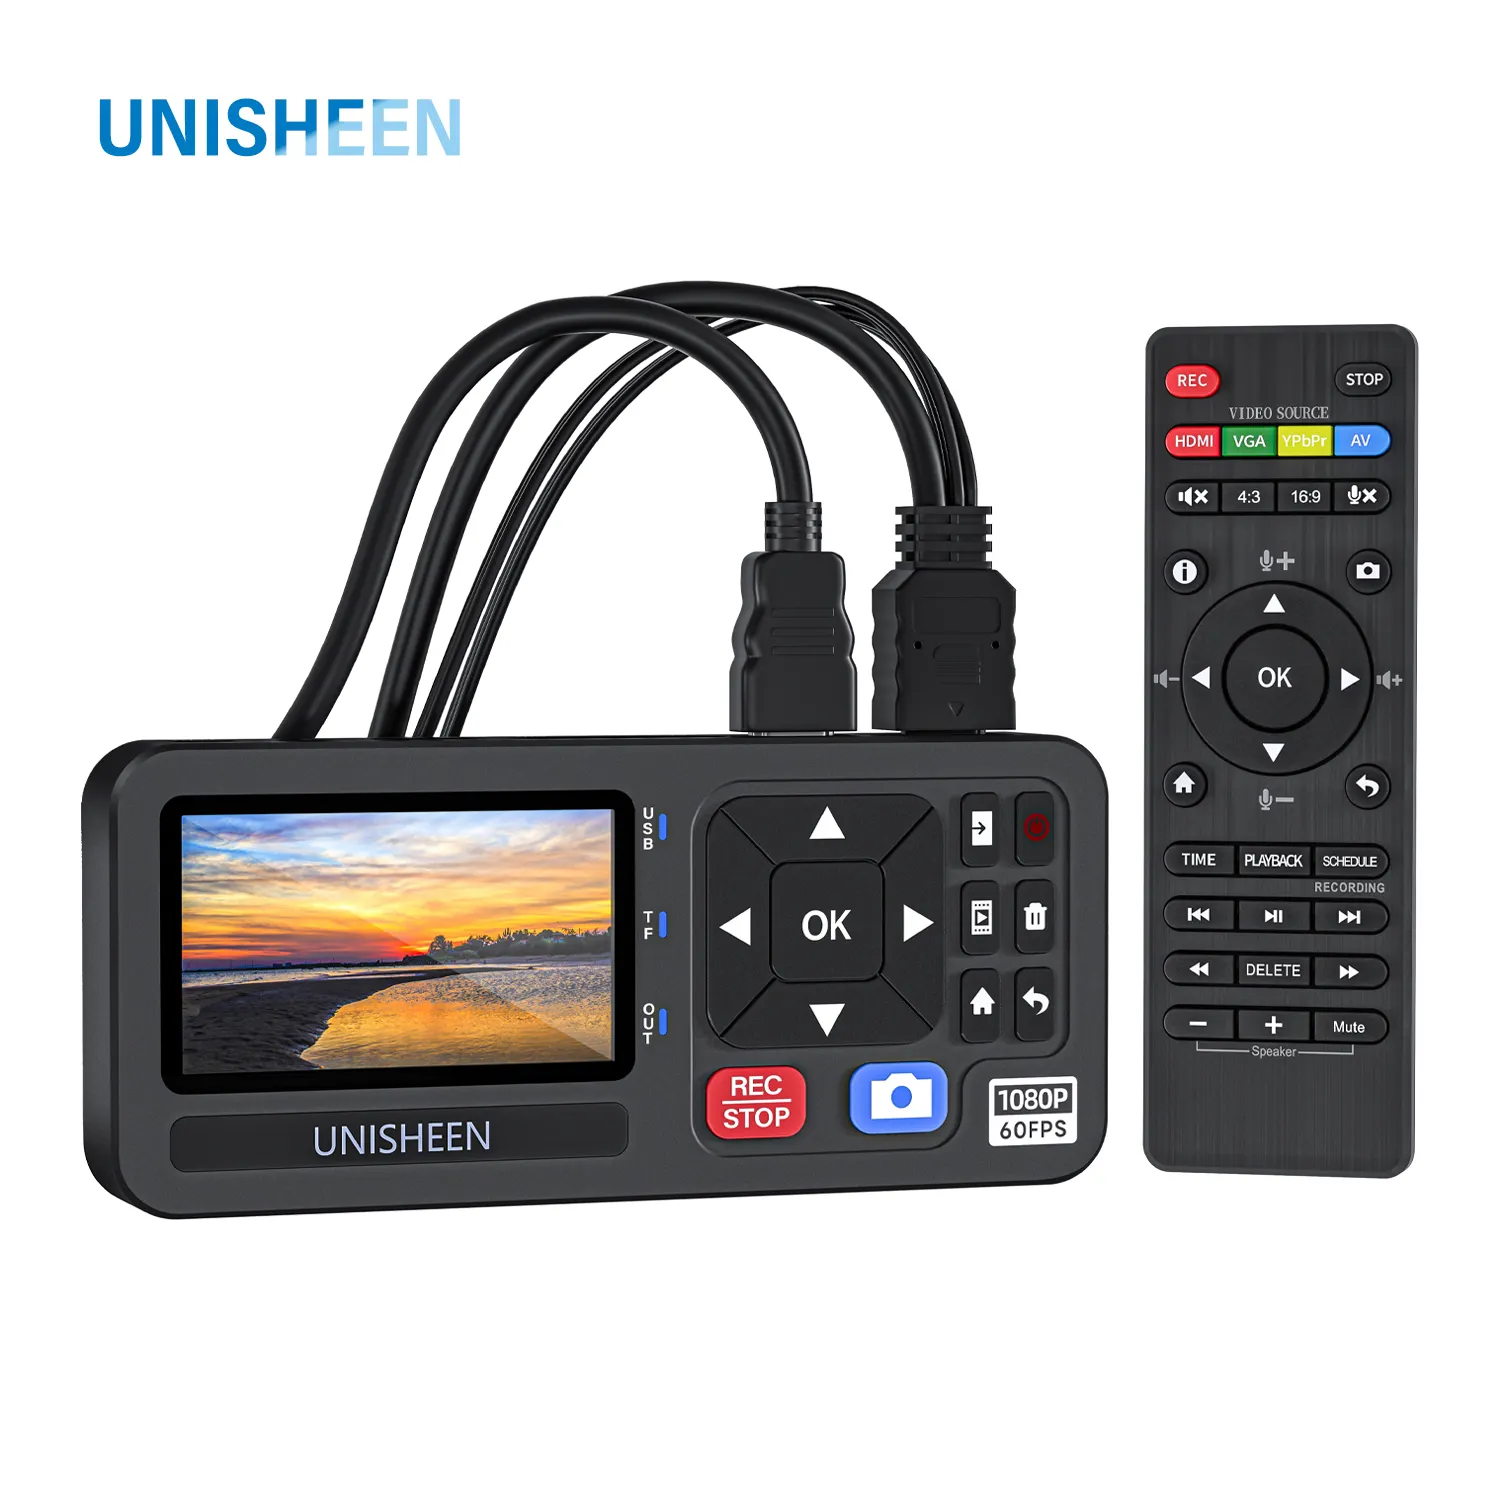 Unisheen Hot HD DVD Video Converter Capture and Stream Video from RCA VHS to Digital Converter Box